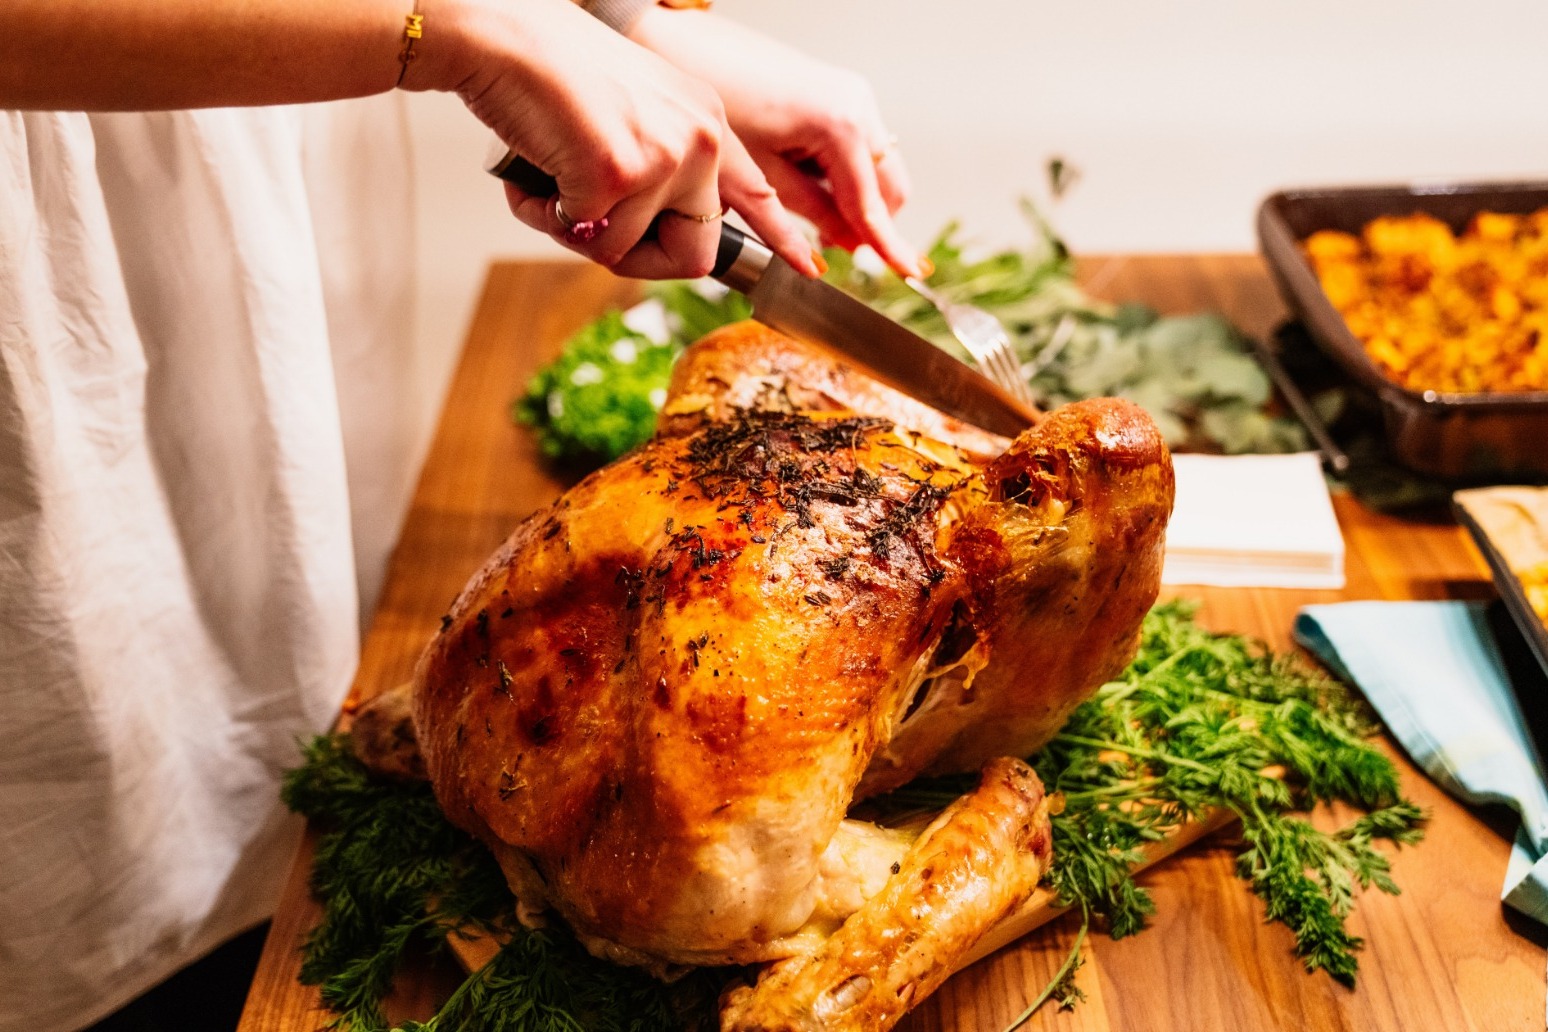 Cheapest supermarkets to buy your Christmas dinner revealed 